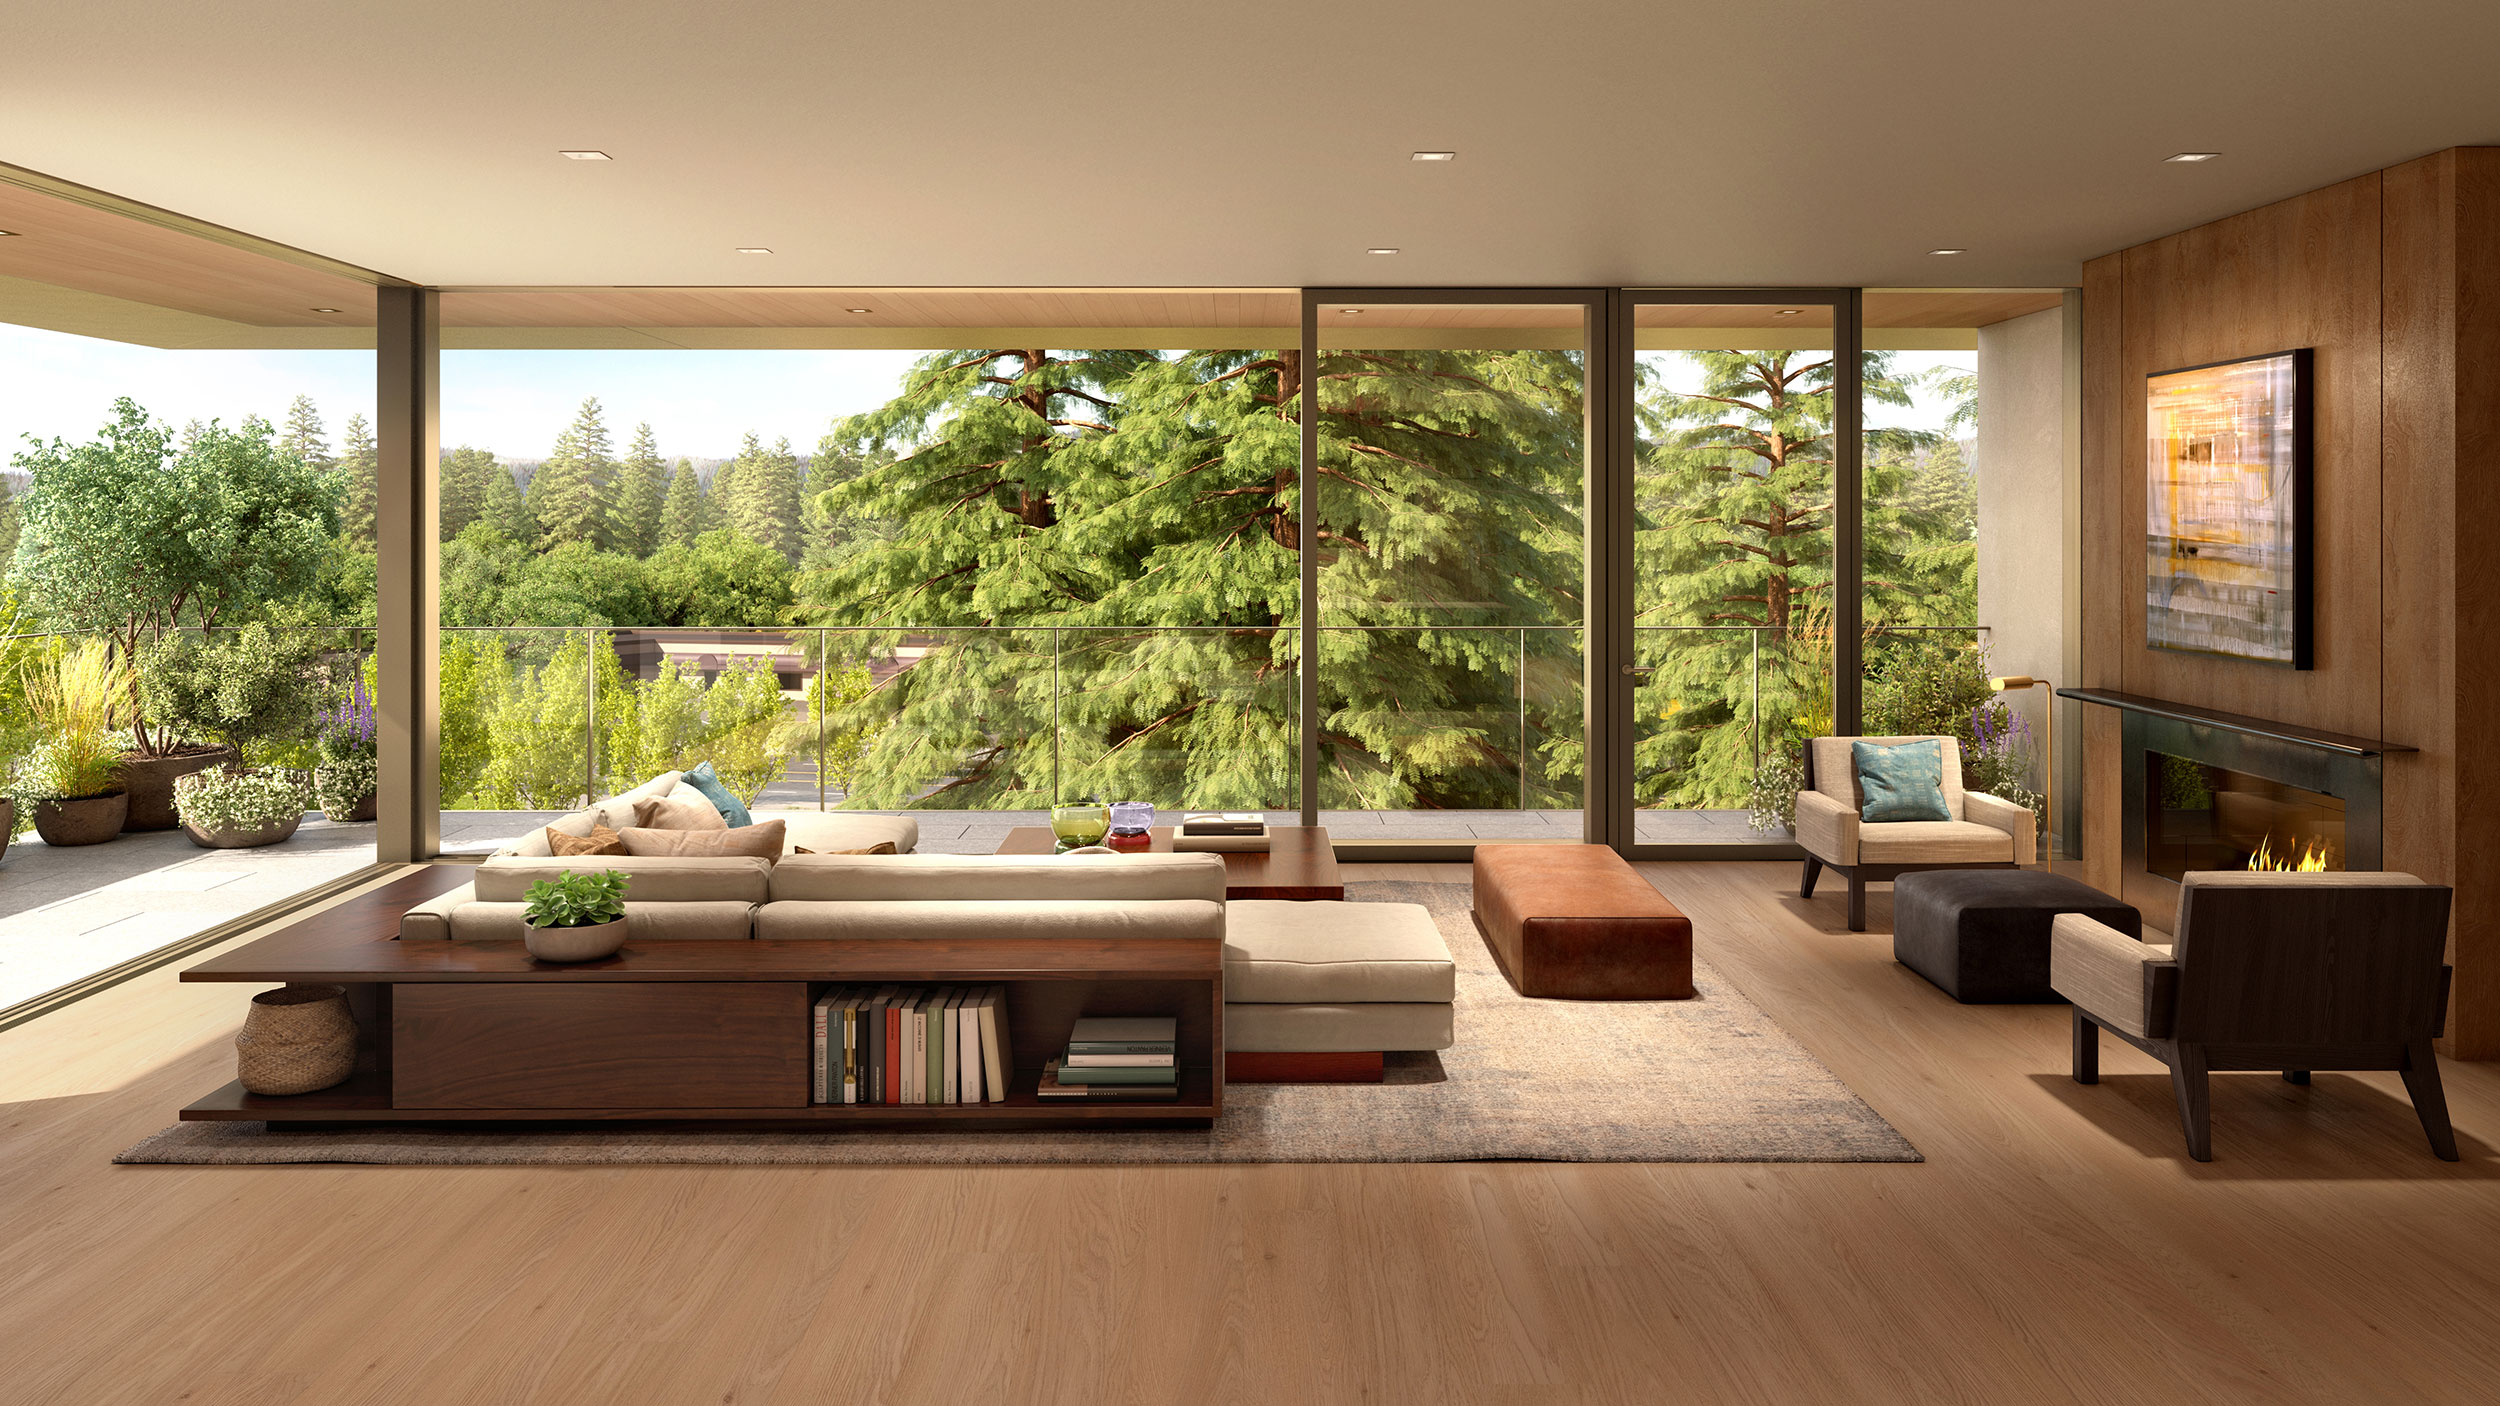 Sliding glass walls provide panoramic views of the redwoods and surrounding landscape.